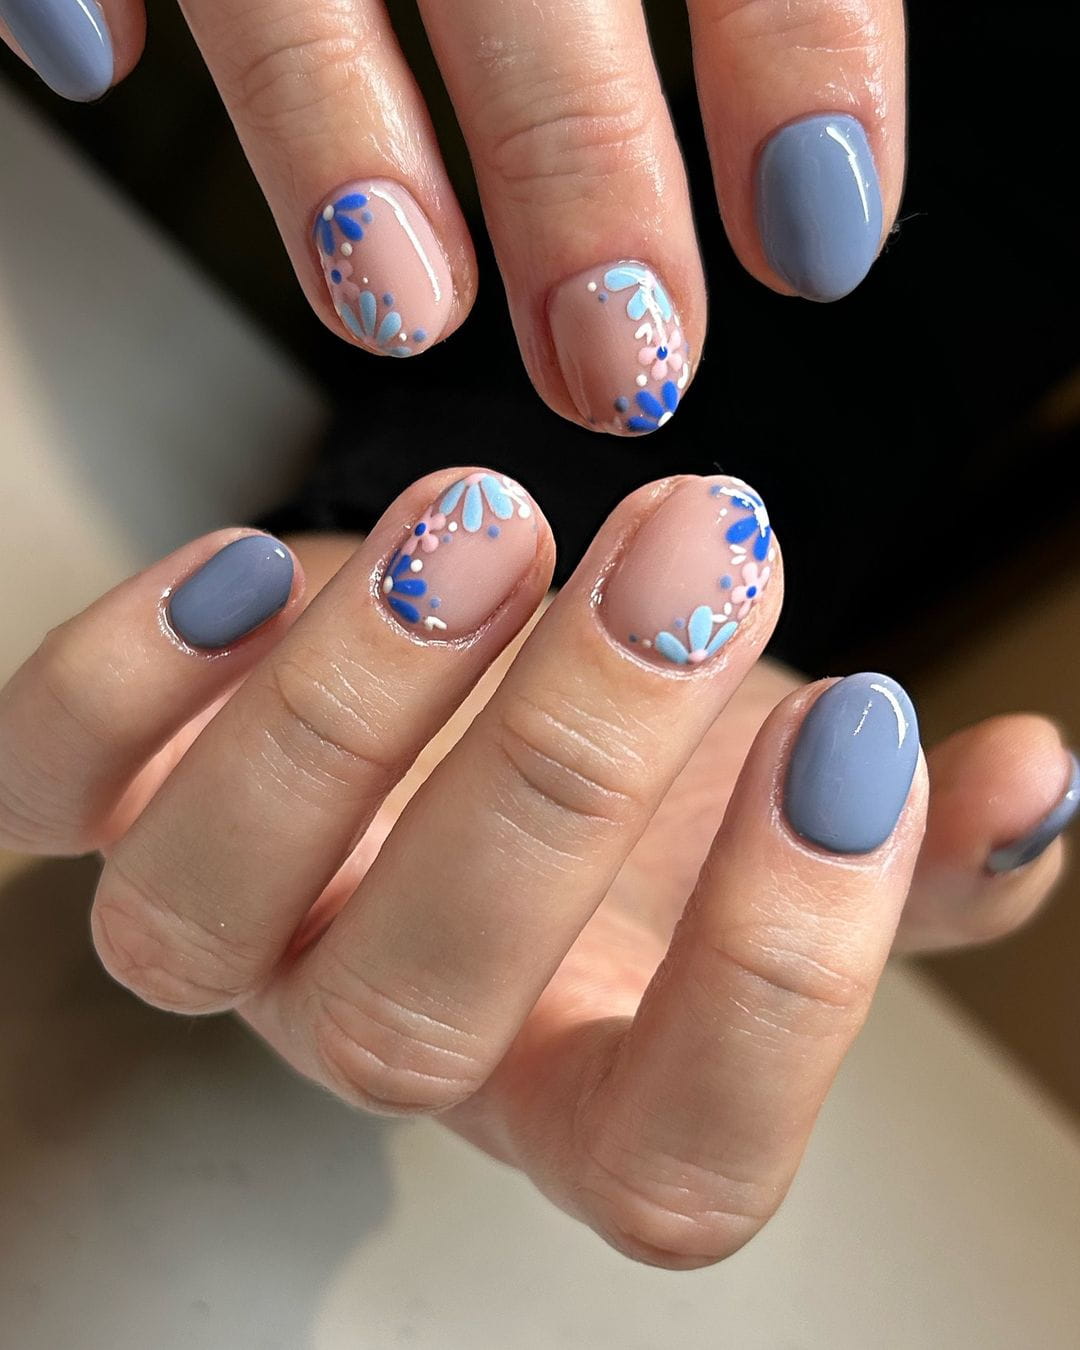 100+ Short Nail Designs You’ll Want To Try This Year images 53